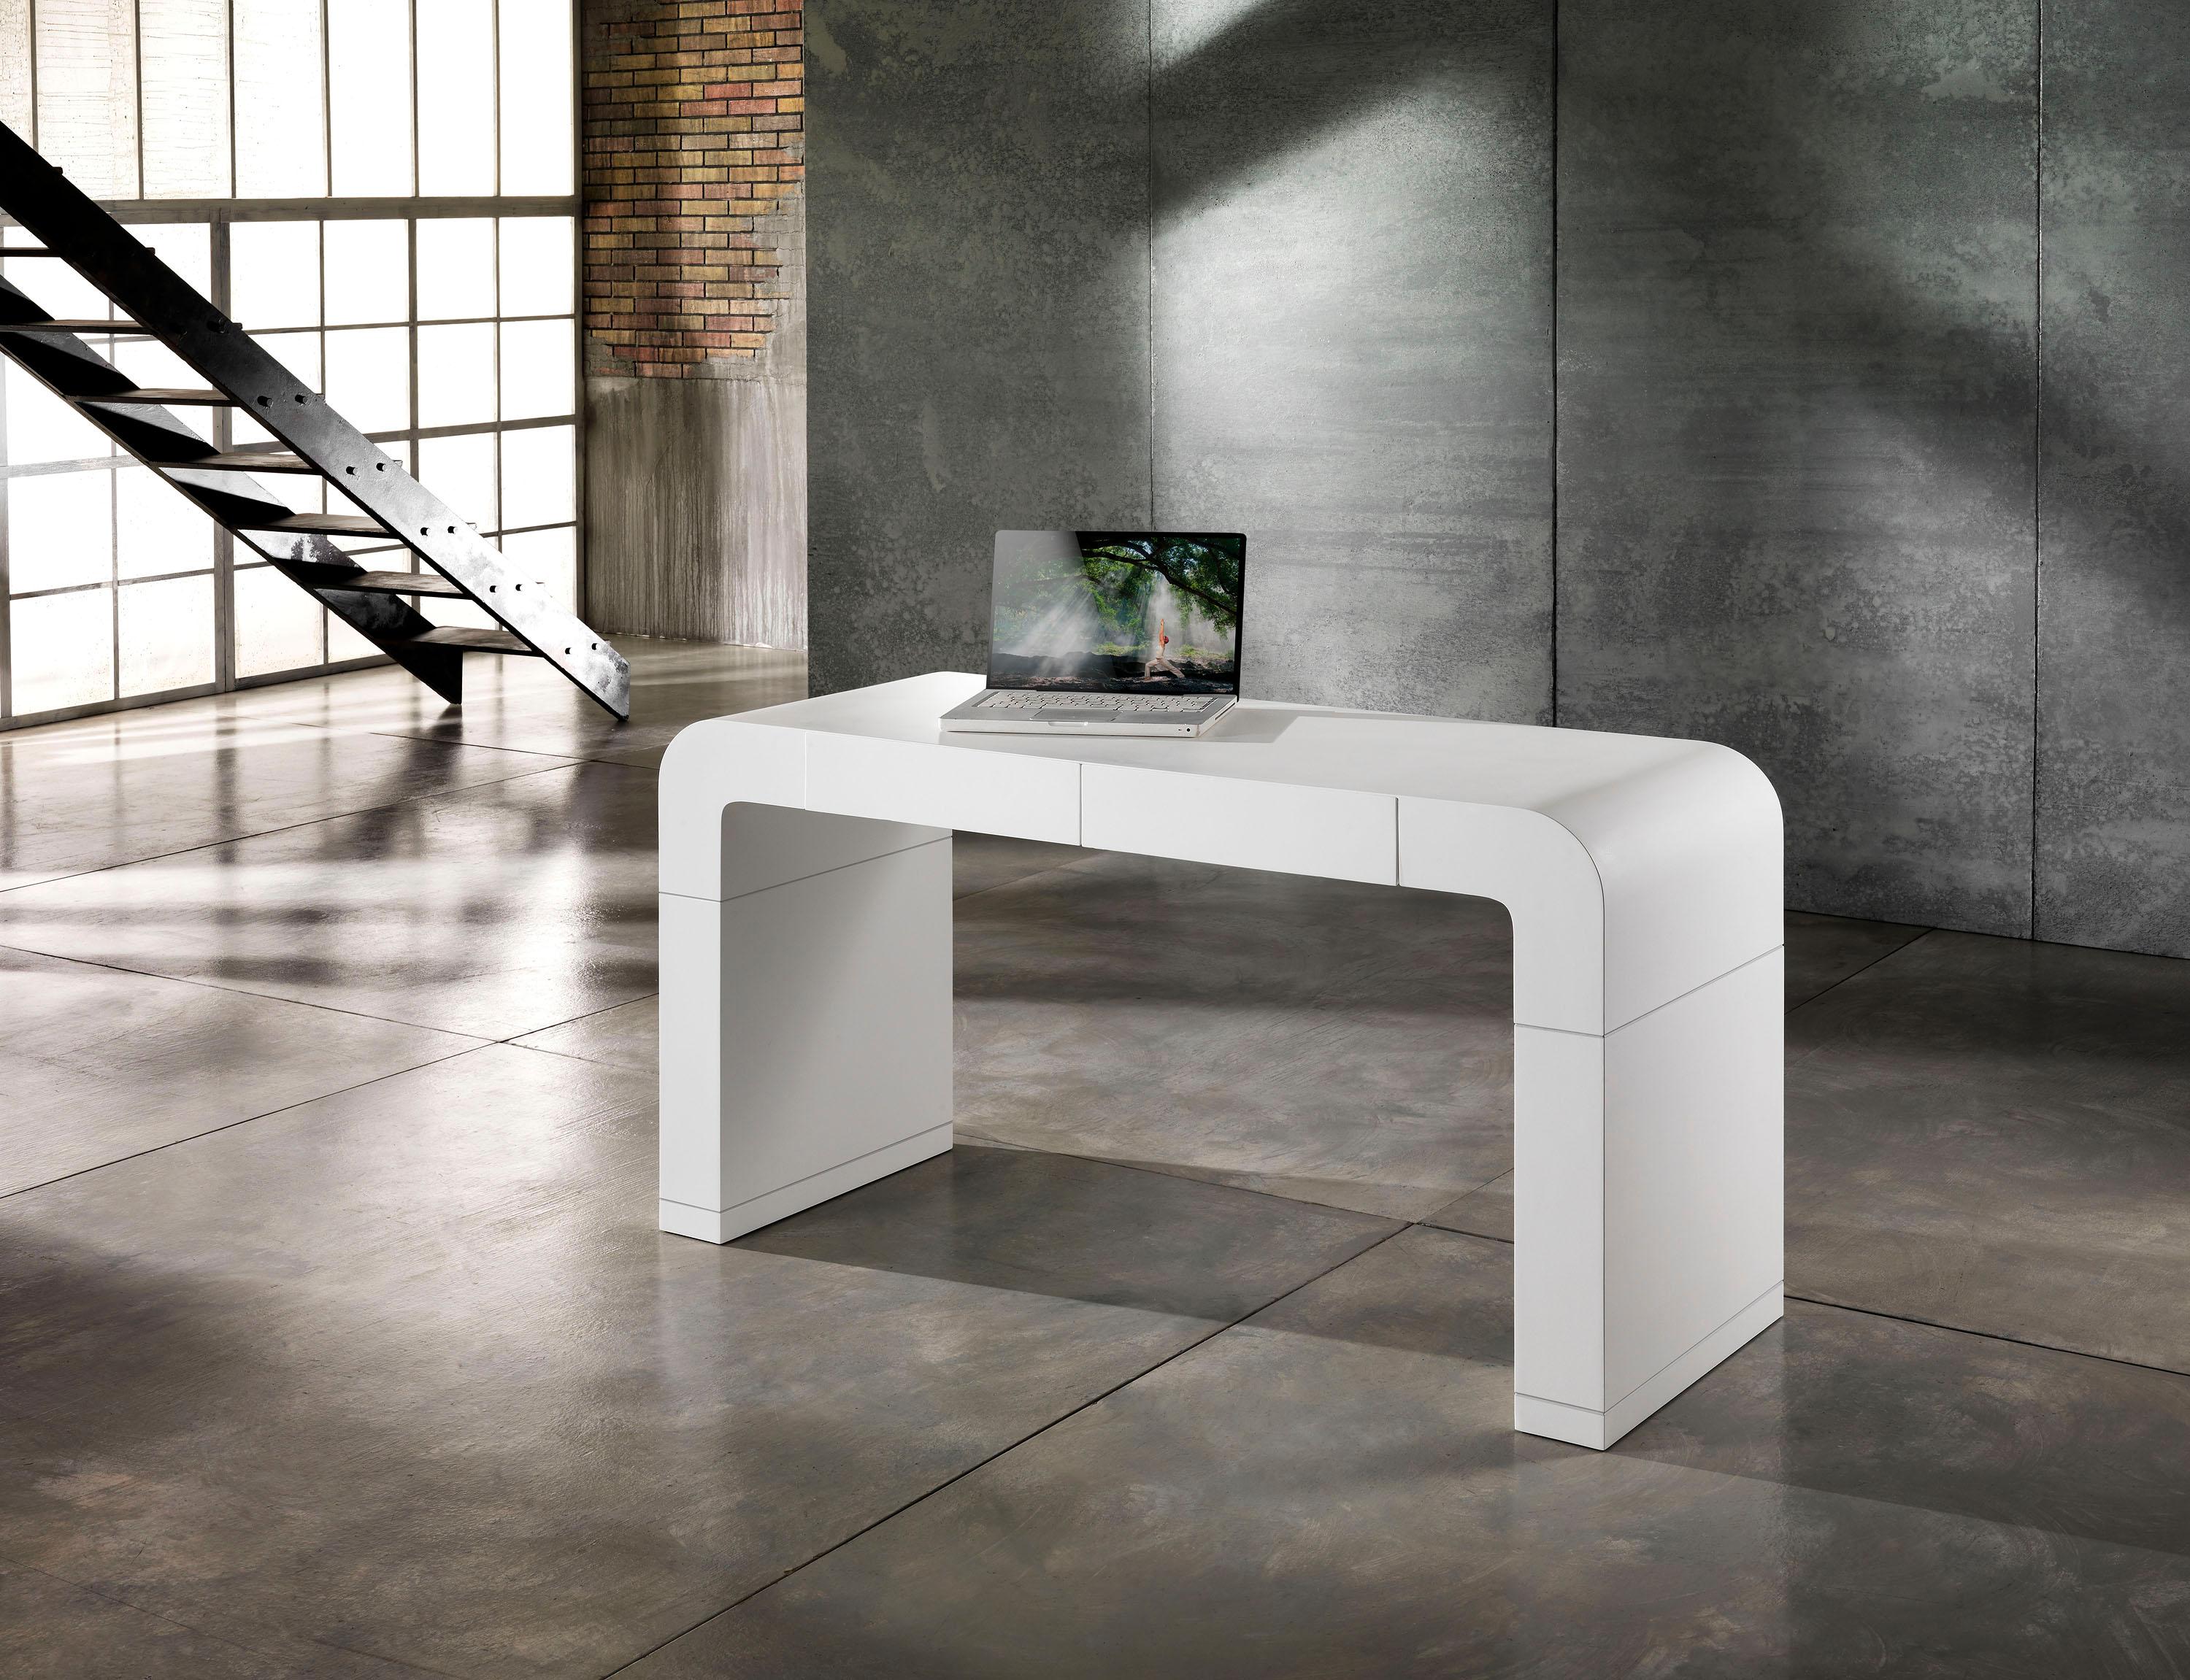 Cloud Desk by Francesco Profili
Dimensions: W 150 x D 50 x H 78 cm 
Materials: Multilayer and MDF.

Linear, sinuous and essential desk, made in curved wood with an opaque lacquered finish.
The desk includes two inner drawers that, when closed, are